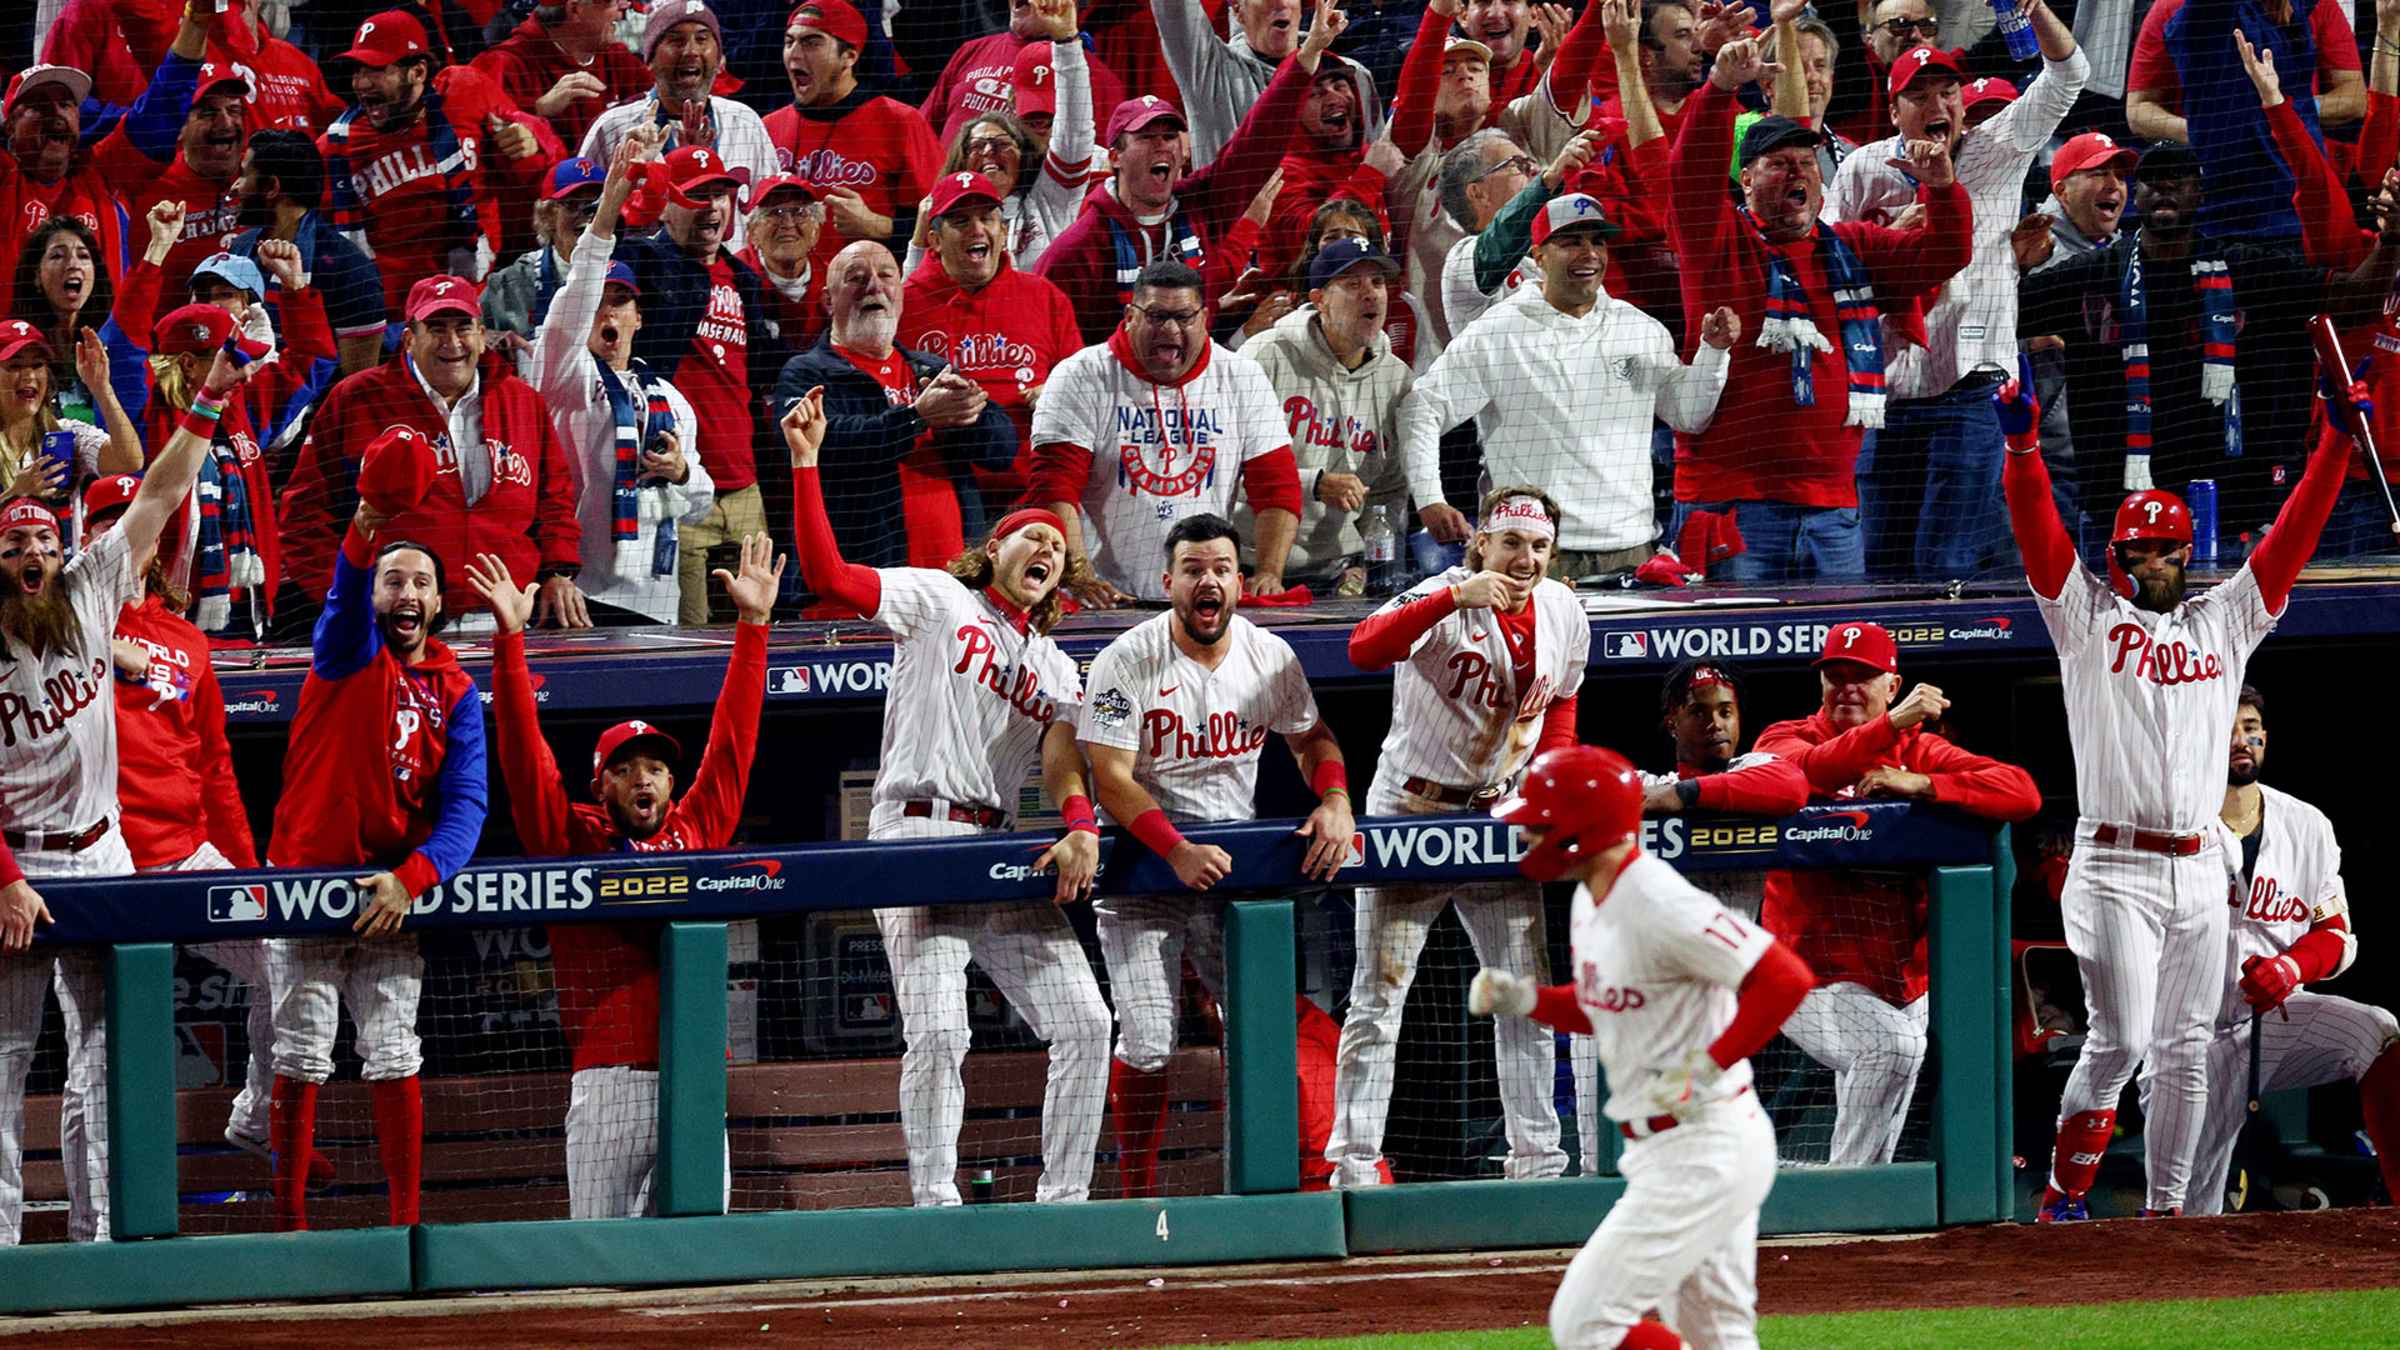 Philadelphia Phillies on X: Tonight was ELECTRIC. Which photo